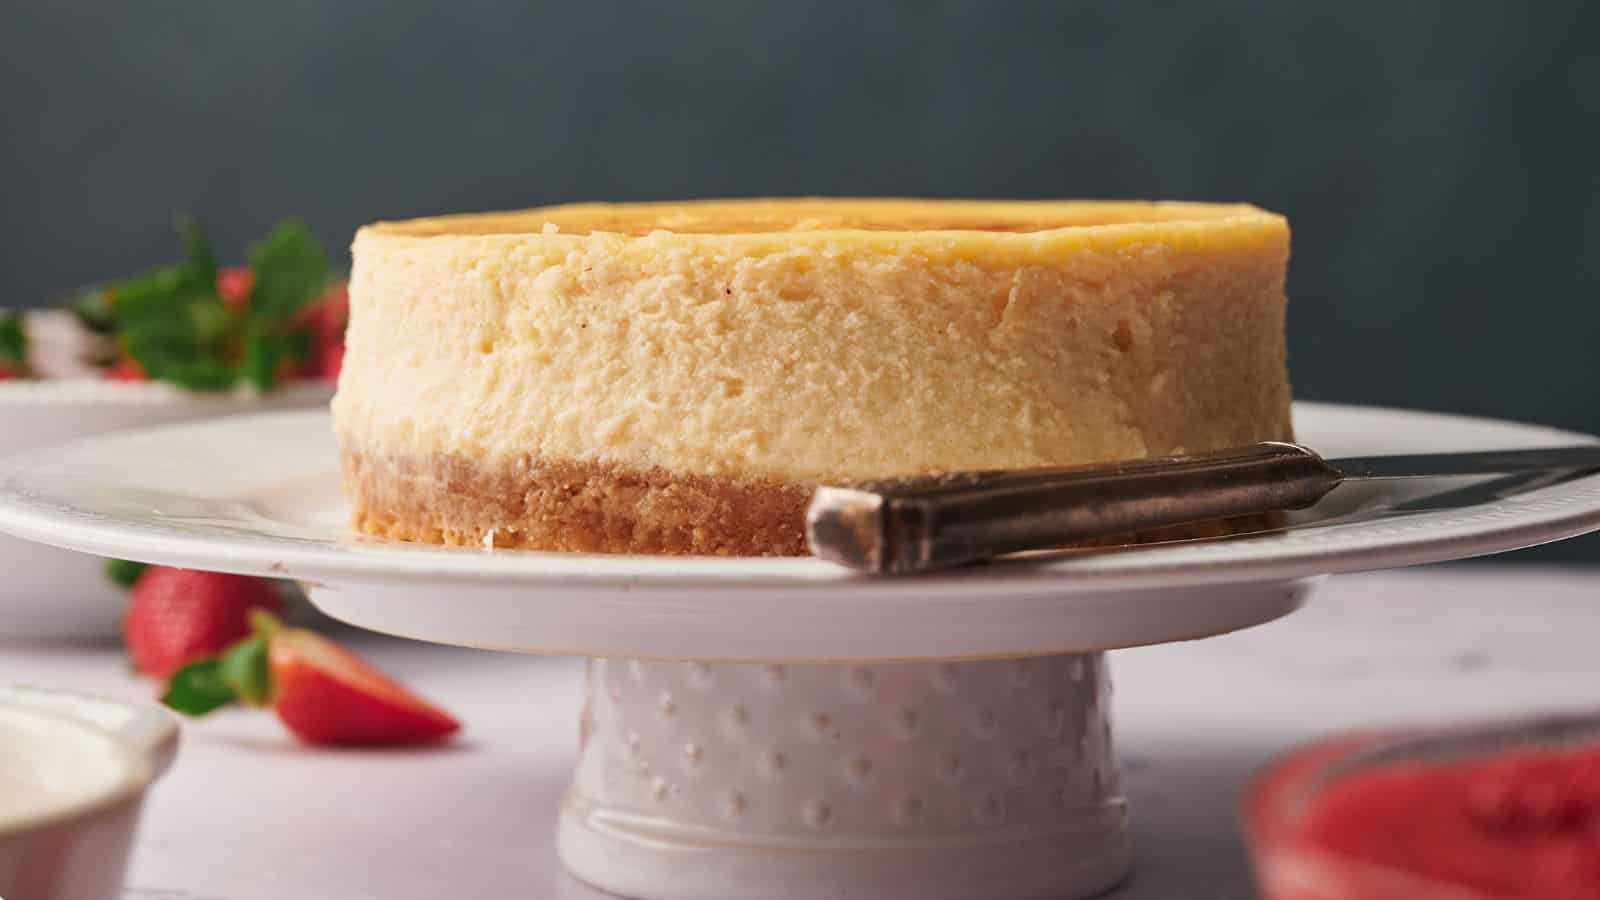 A cheesecake on a cake stand.